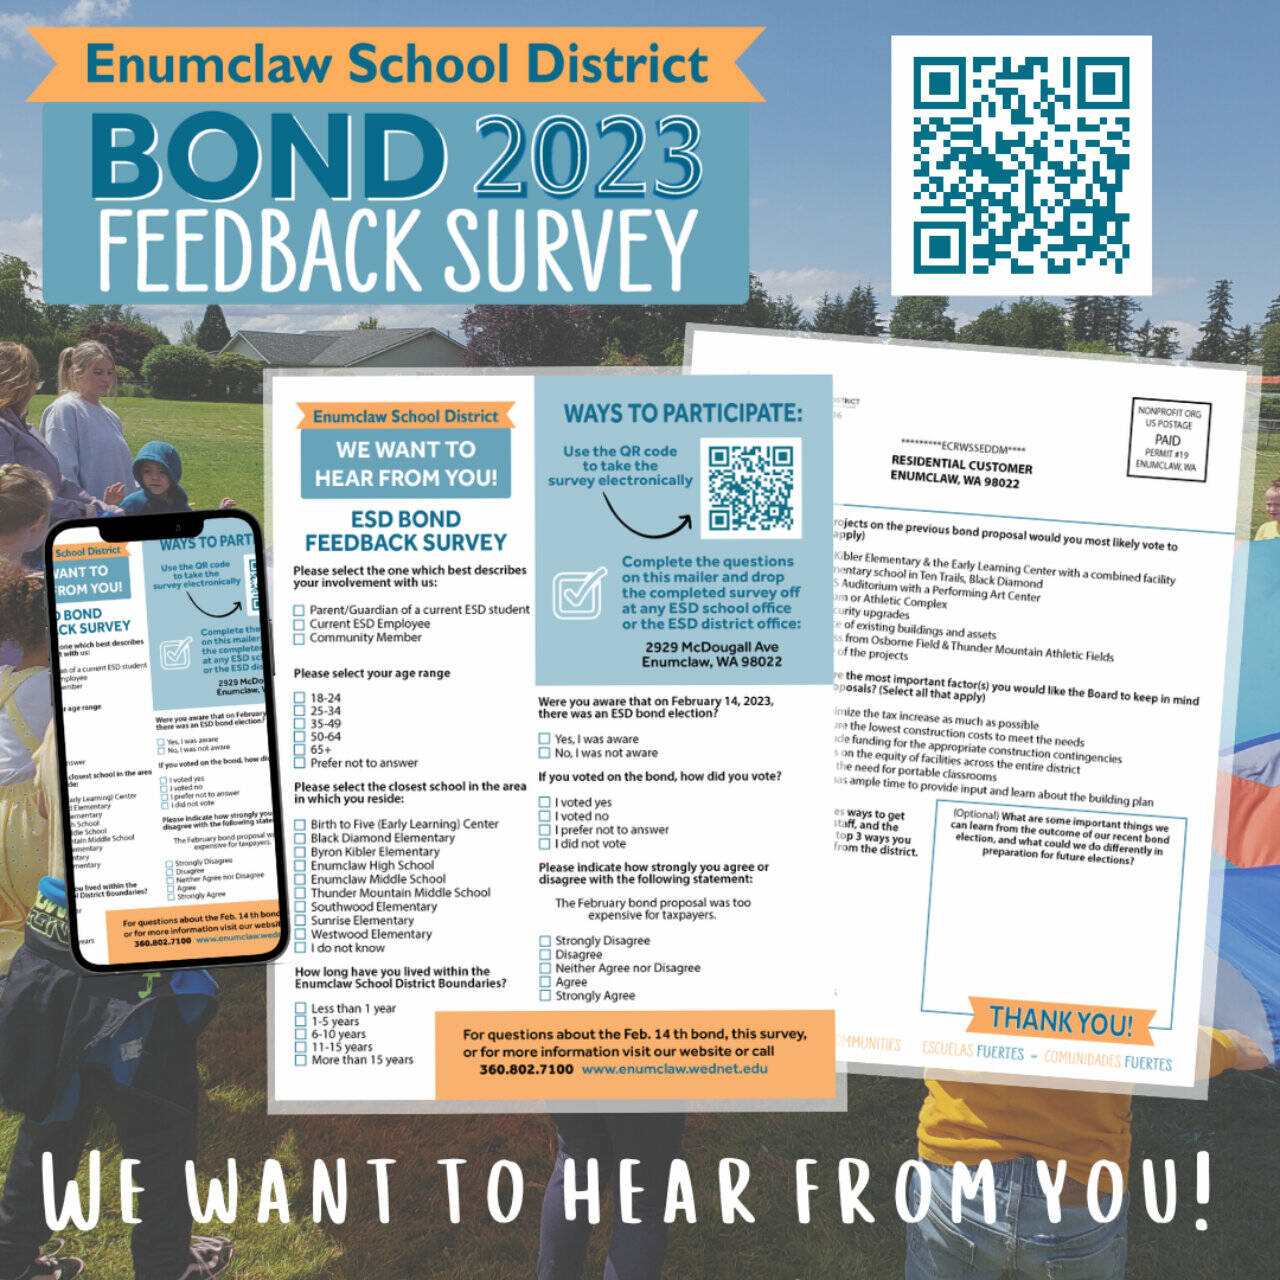 The Enumclaw School District is again collecting public opinion on possible future bond measures. Head to <a href="http://www.enumclaw.wednet.edu/article/1082511" target="_blank">enumclaw.wednet.edu/article/1082511</a> or scan the QR code above to take the short questionnaire. Screenshot